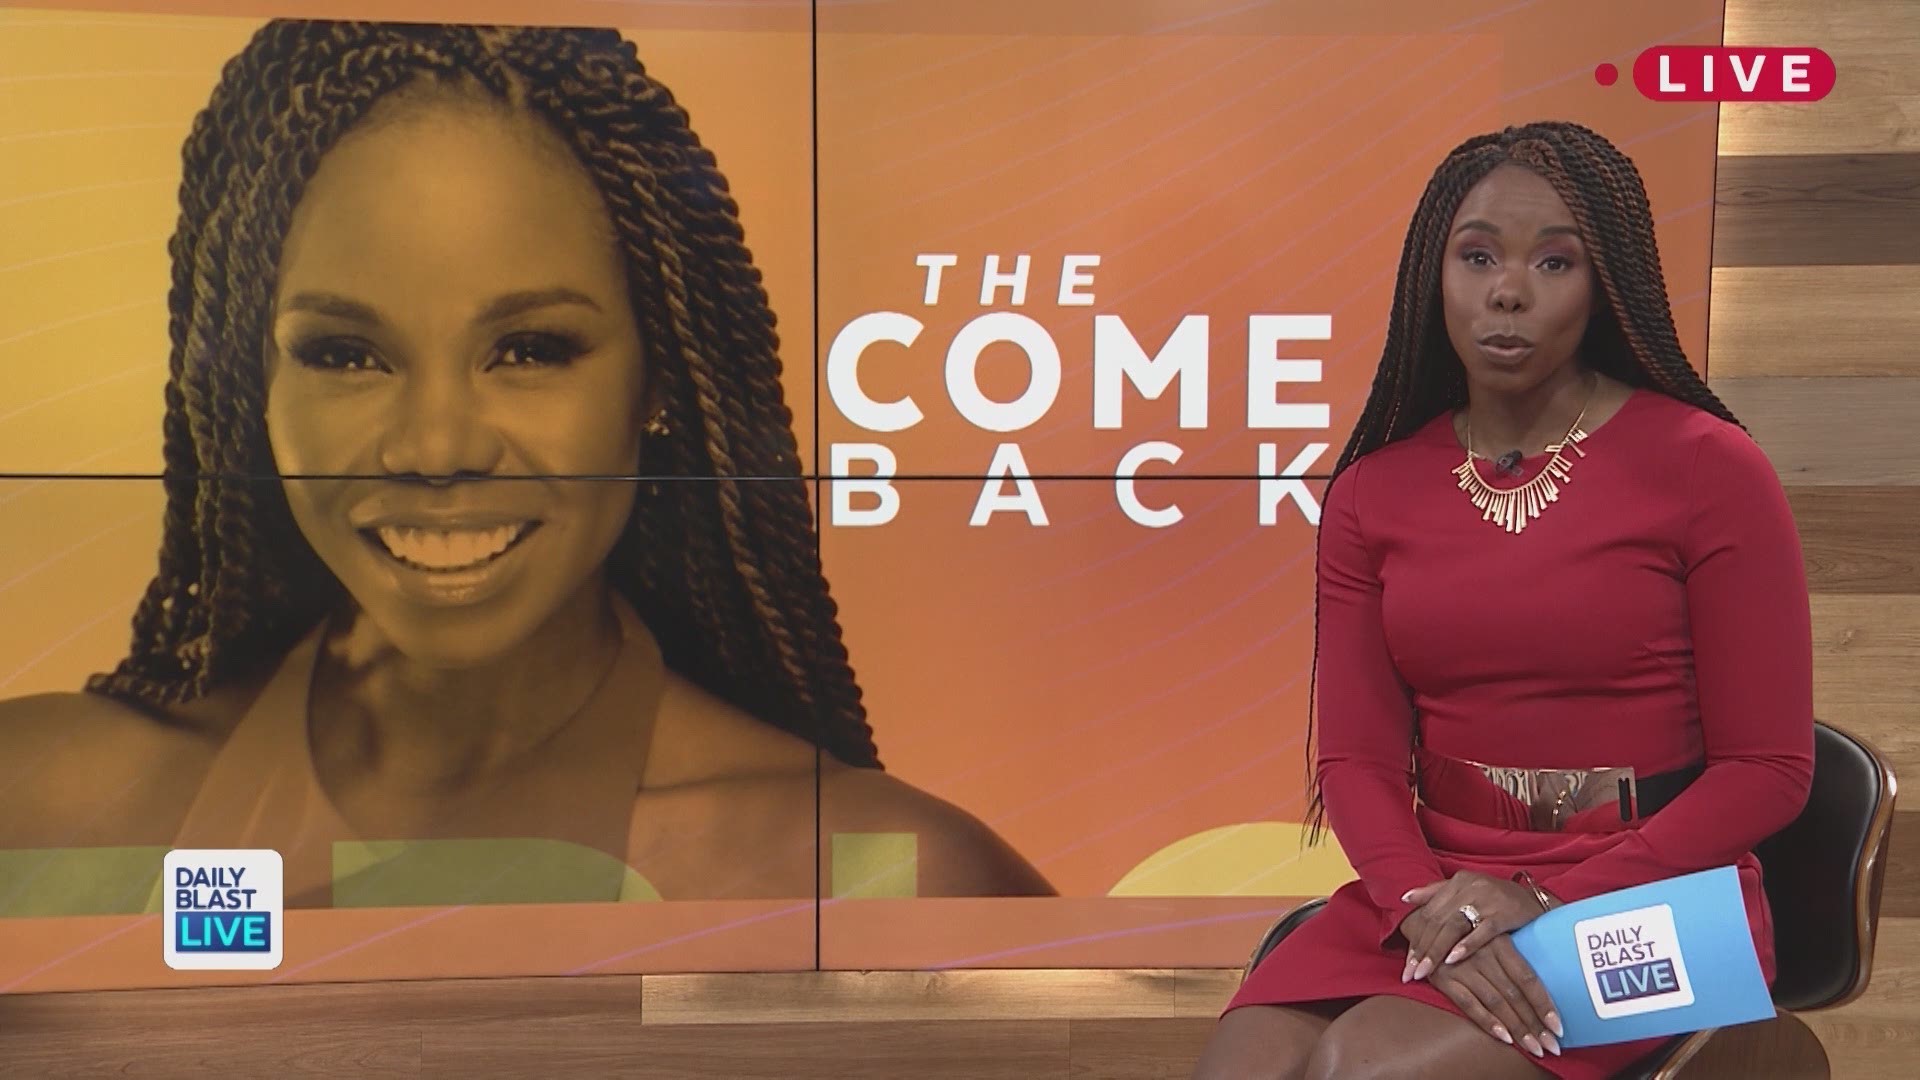 23-year-old Shia Yearwood turned a bad situation into a business opportunity. After her mugshot went viral, she used it as a marketing opportunity. This is the ultimate comeback.